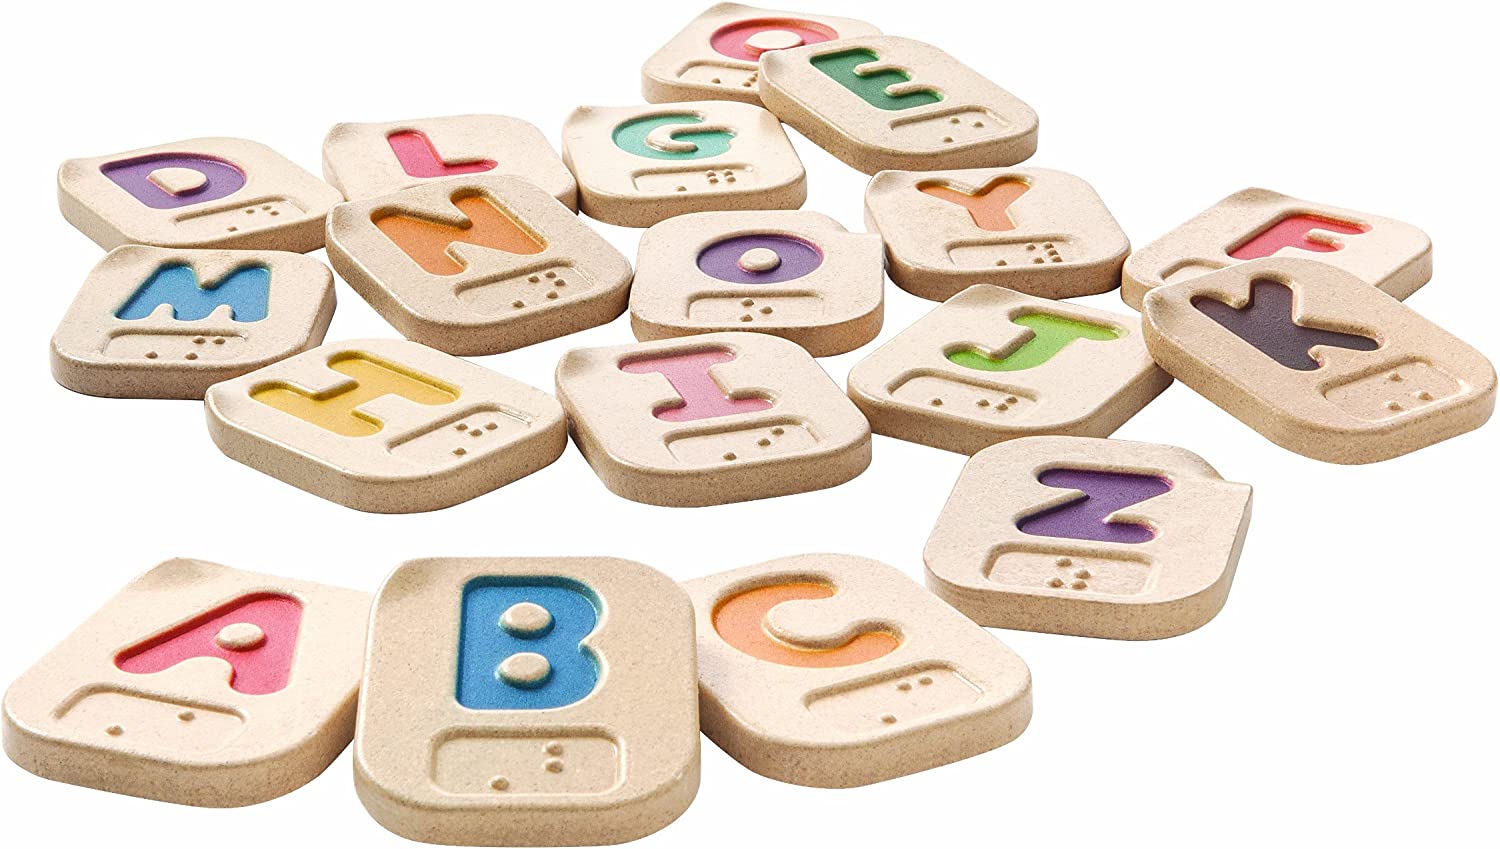 Braille tiles featuring the letters of the alphabet toy